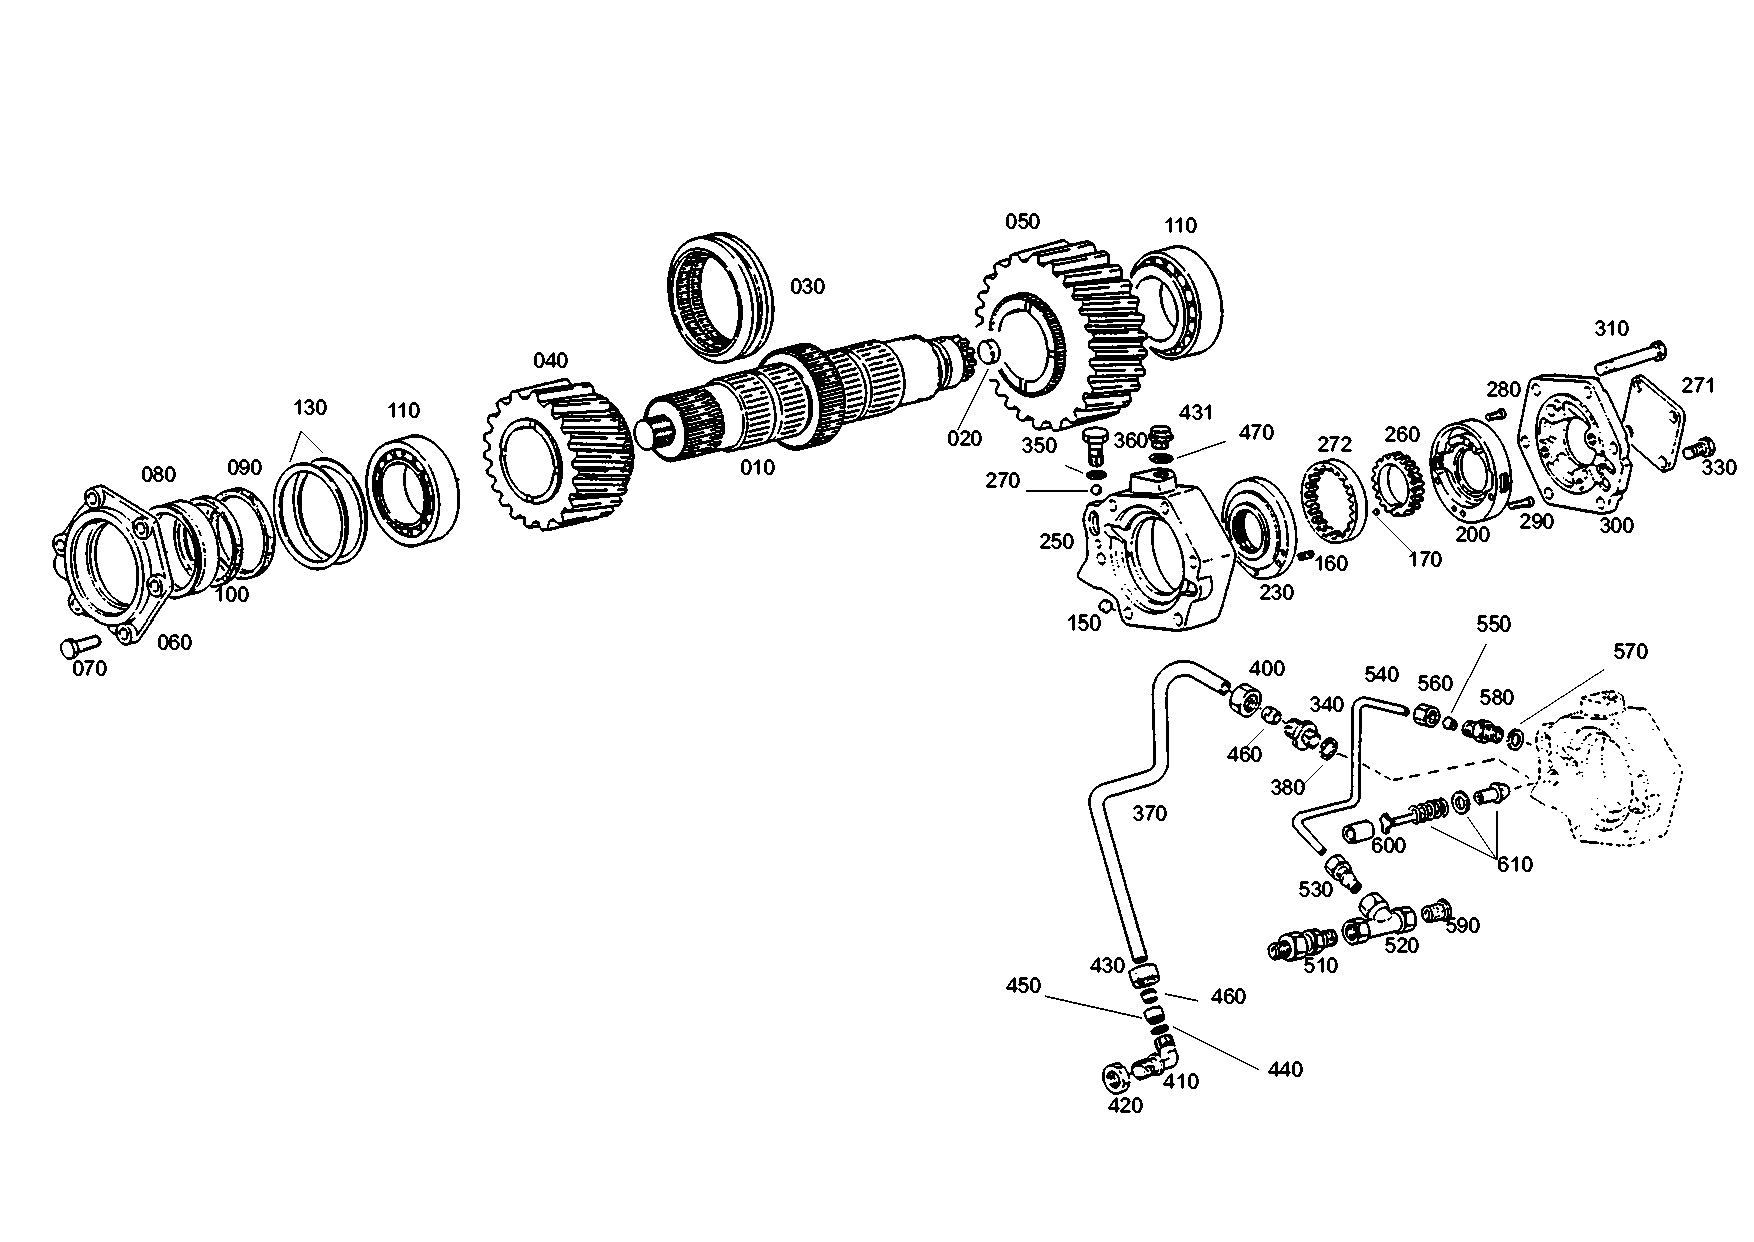 drawing for MARMON Herring MVG202007 - INPUT SHAFT (figure 2)